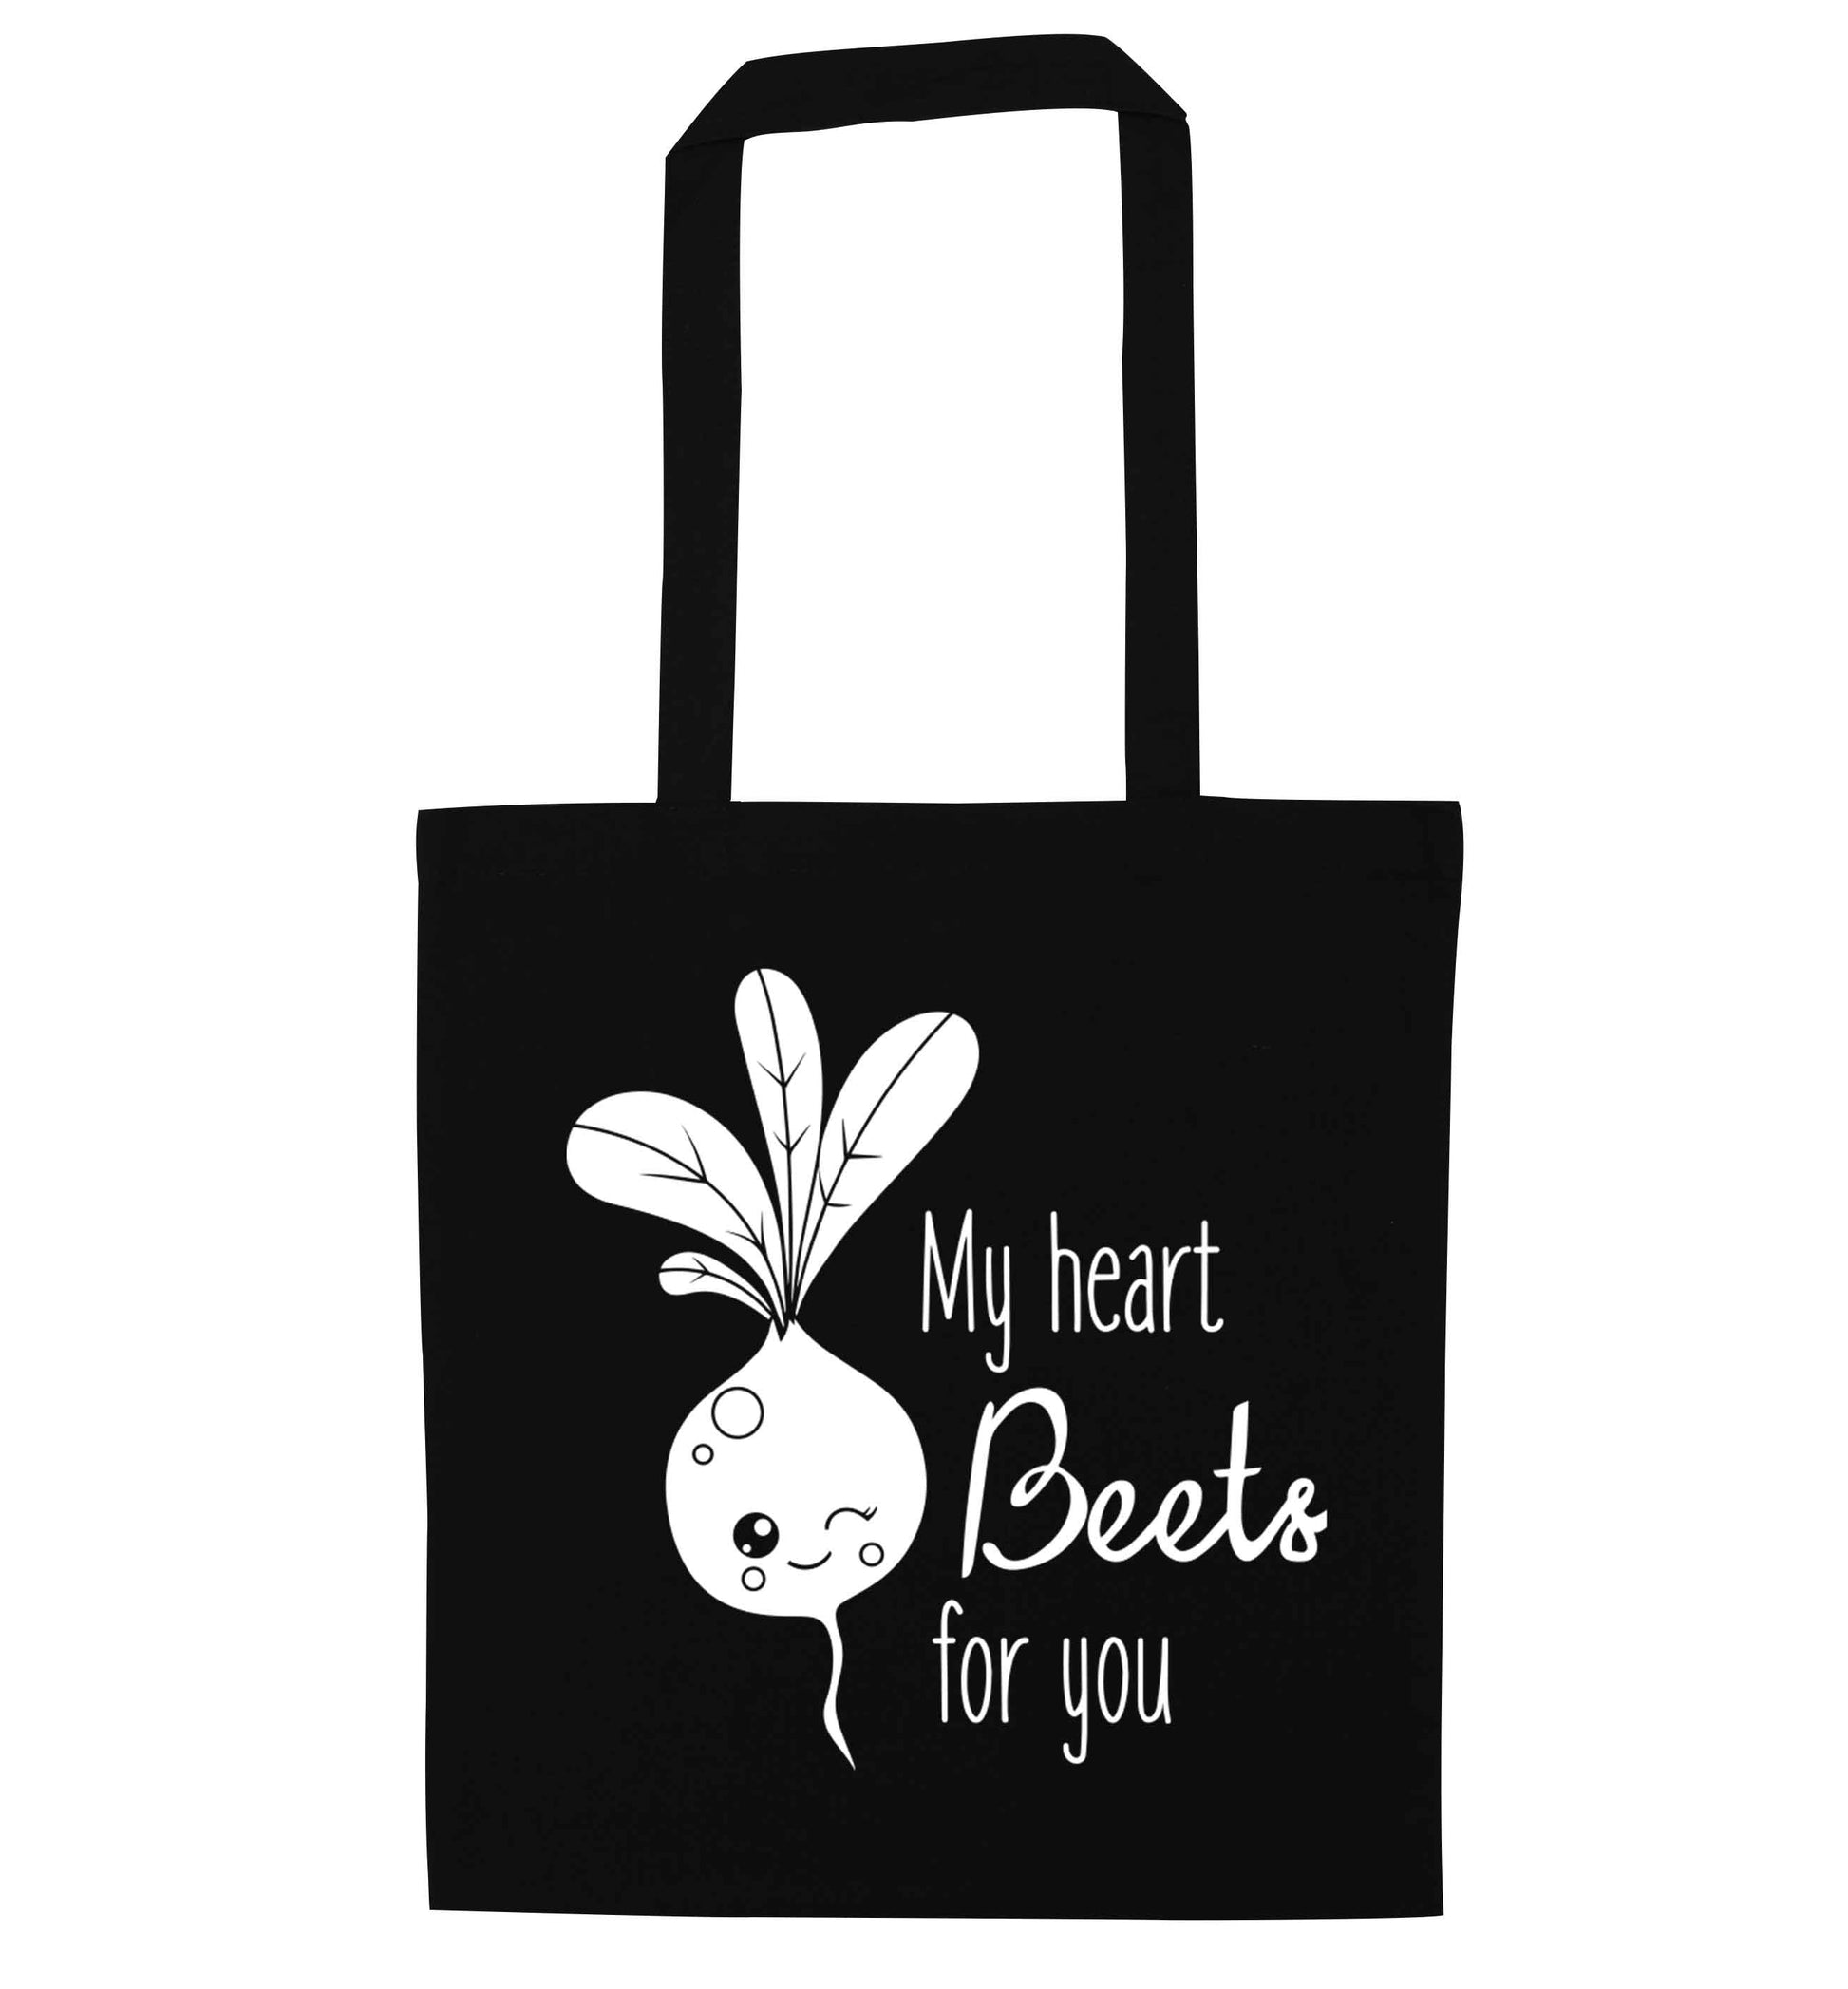 My heart beets for you black tote bag